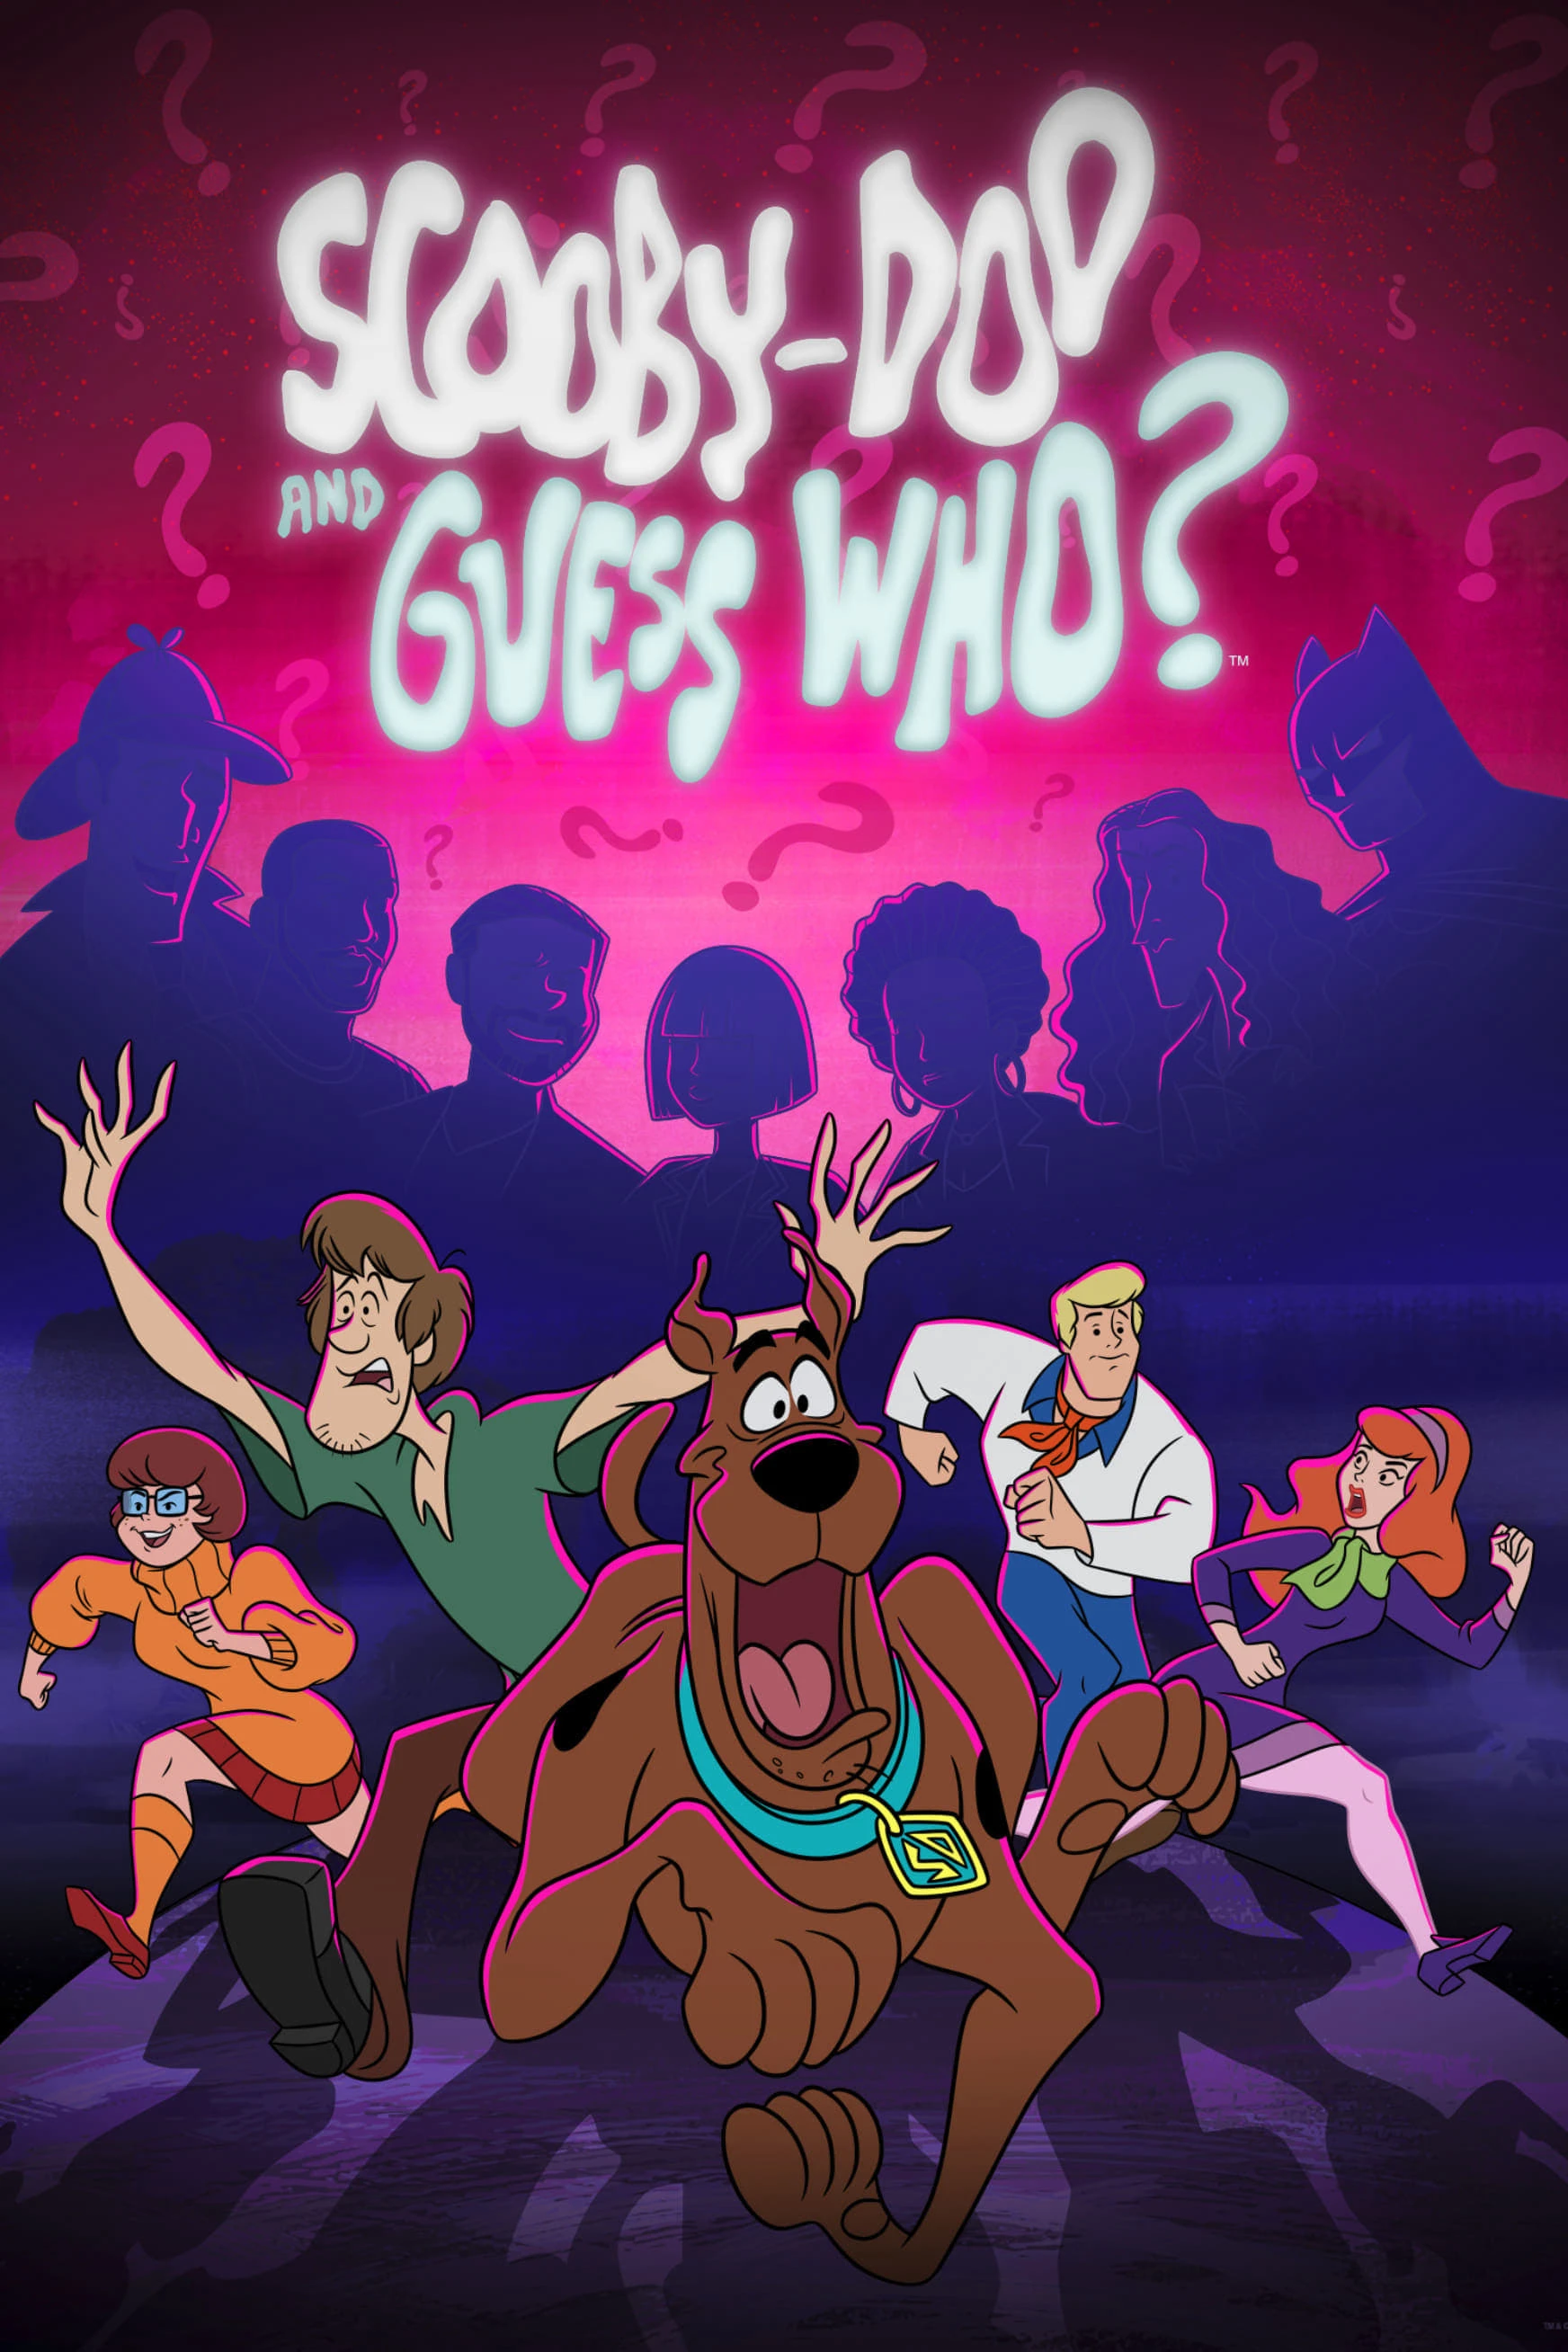 Scooby-Doo and Guess Who? (Phần 2) | Scooby-Doo and Guess Who? (Season 2) (2020)